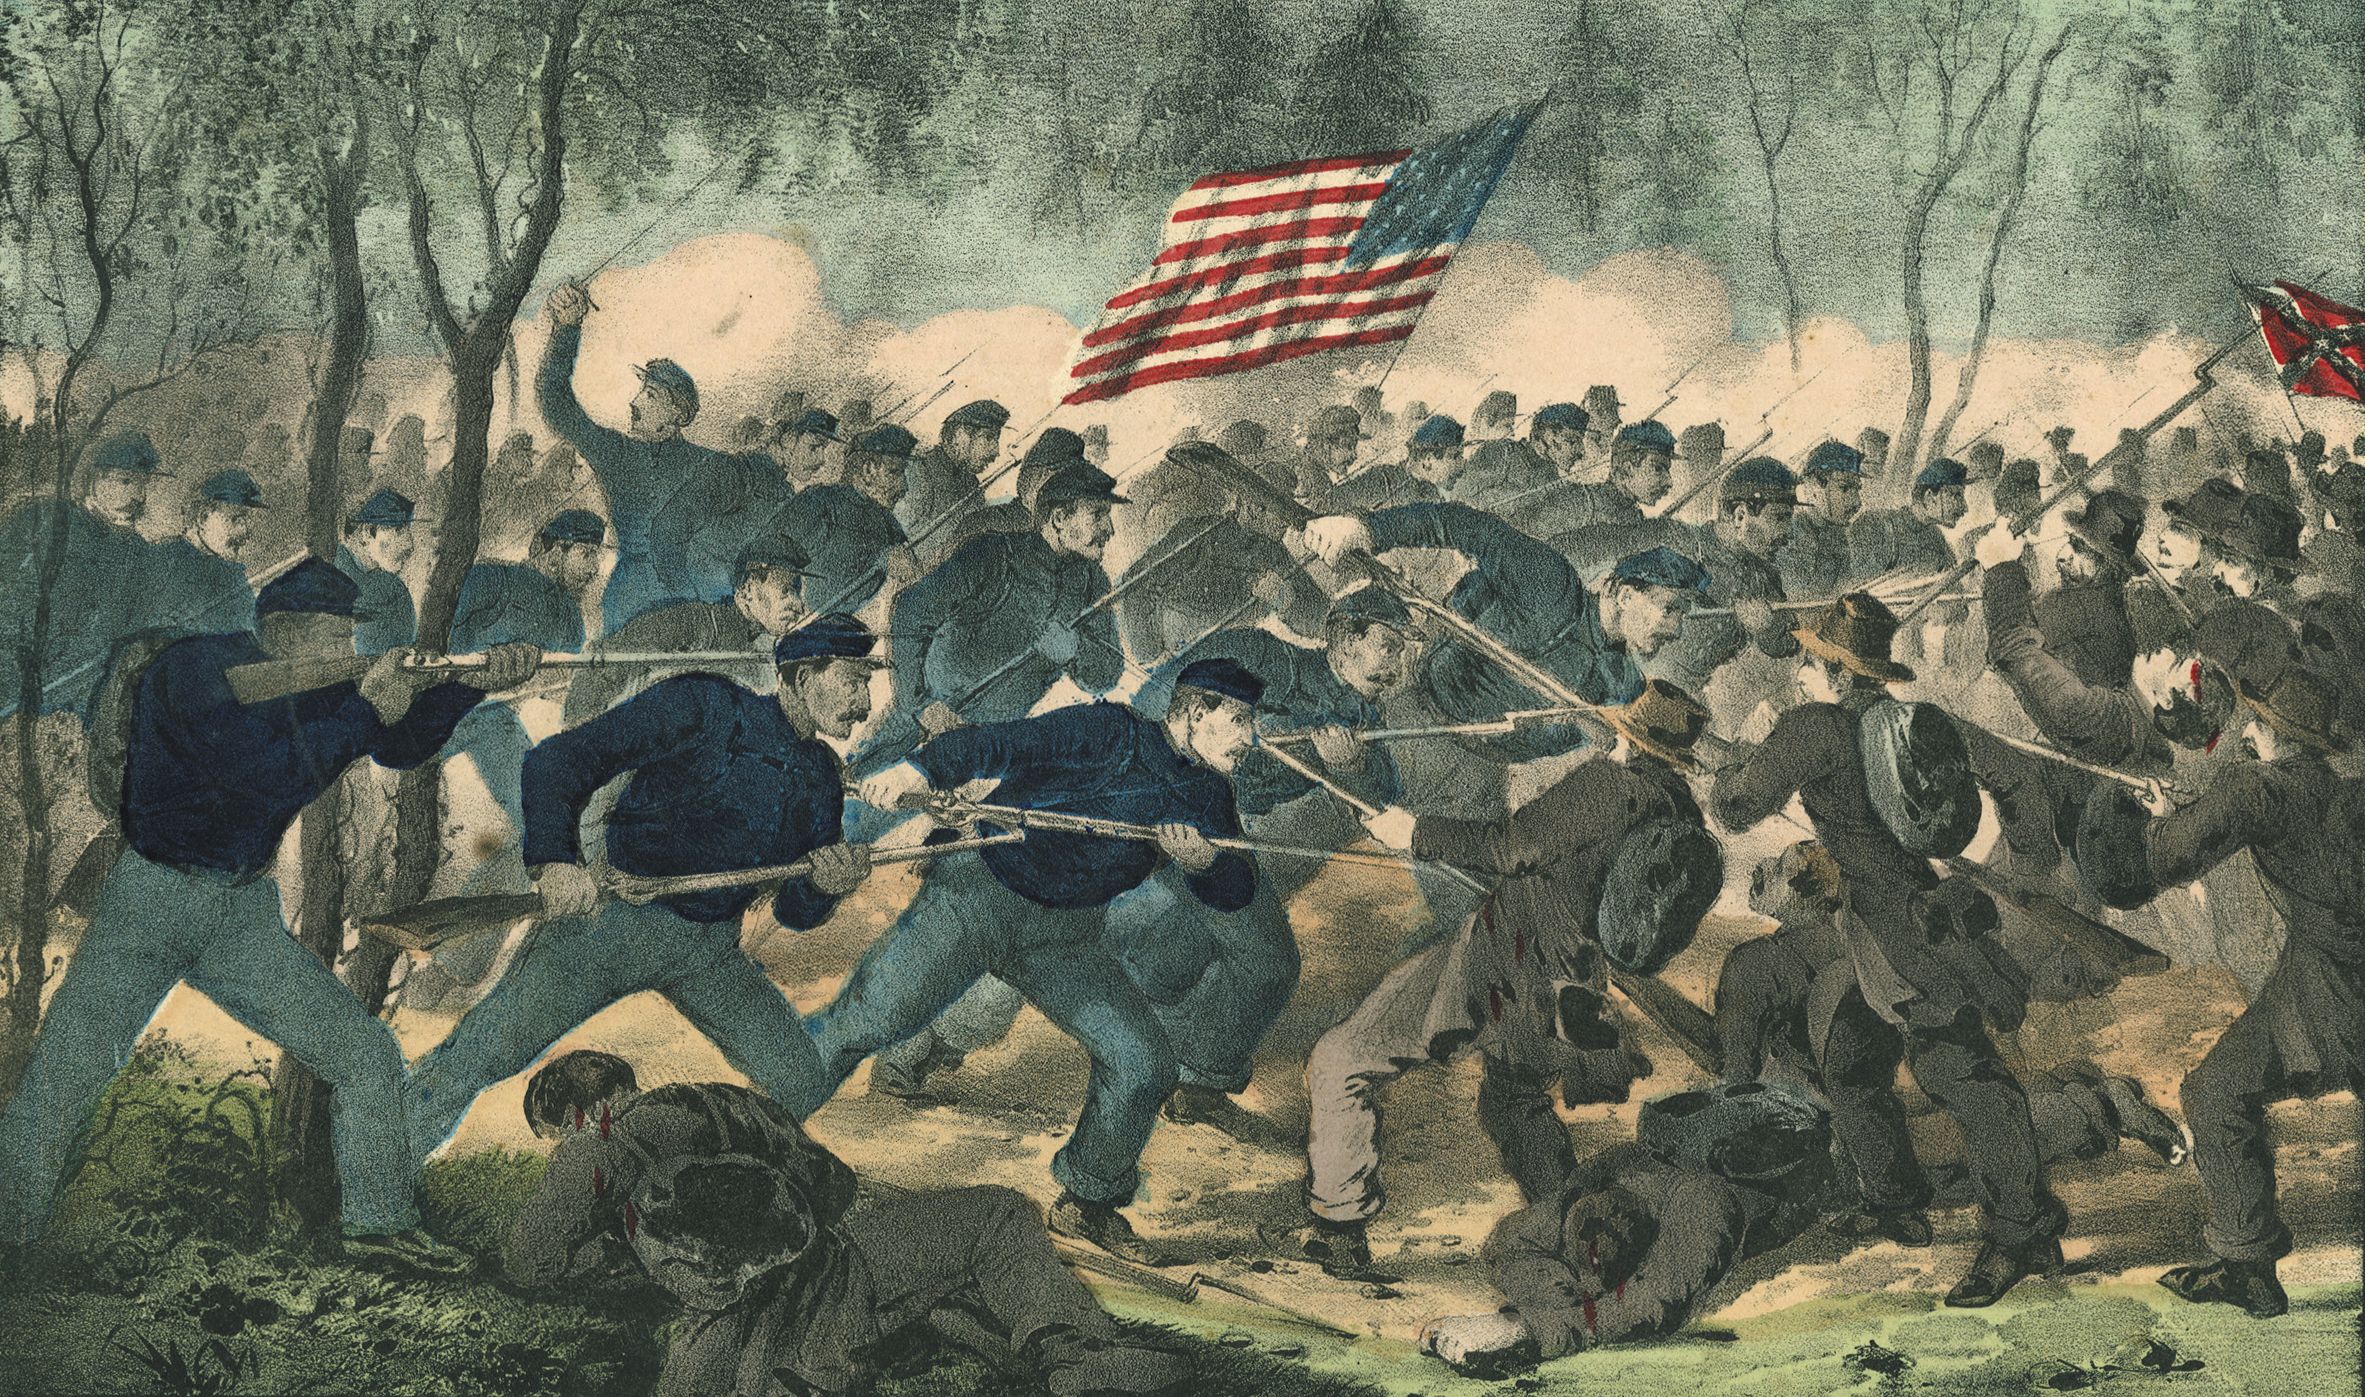 Union and Confederate forces followed Upton’s daring but unsuccessful assault with two days of even greater slaughter at Spotsylvania’s Bloody Angle.